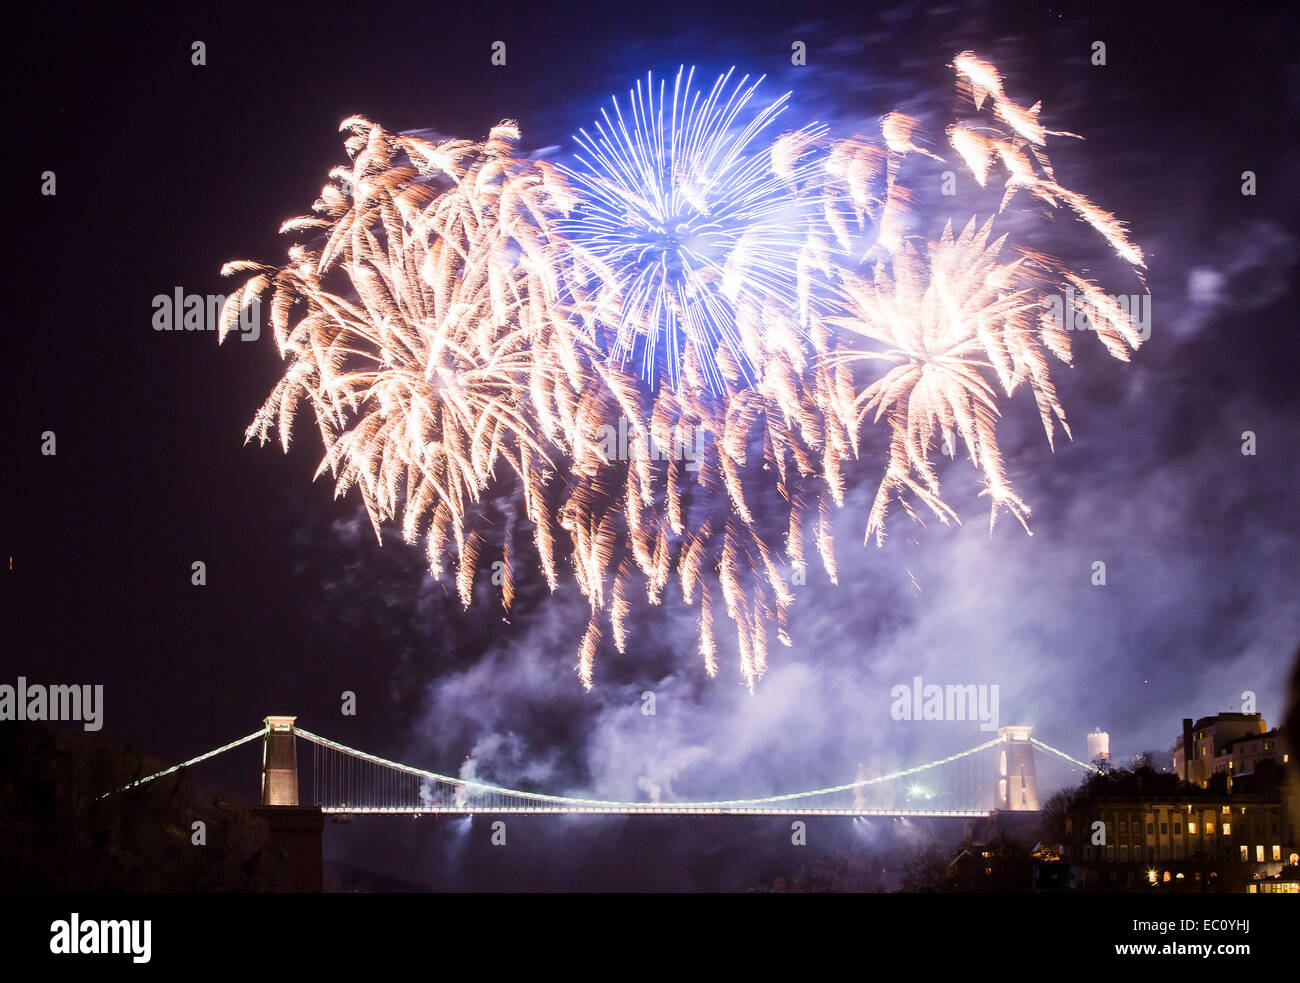 Bristol, UK. 7th Dec, 2014. Isambard Kingdom Brunel's Clifton Suspension Bridge marks the 150th anniversary of its opening with an elaborate fireworks display. Thousands of people lined the streets of Bristol to watch the event. The display was preceded by a one minute silence in memory of Charlotte Bevan and her daughter Zaani, whose bodies were discovered near the bridge earlier this week. Credit:  Adam Gasson/Alamy Live News Stock Photo